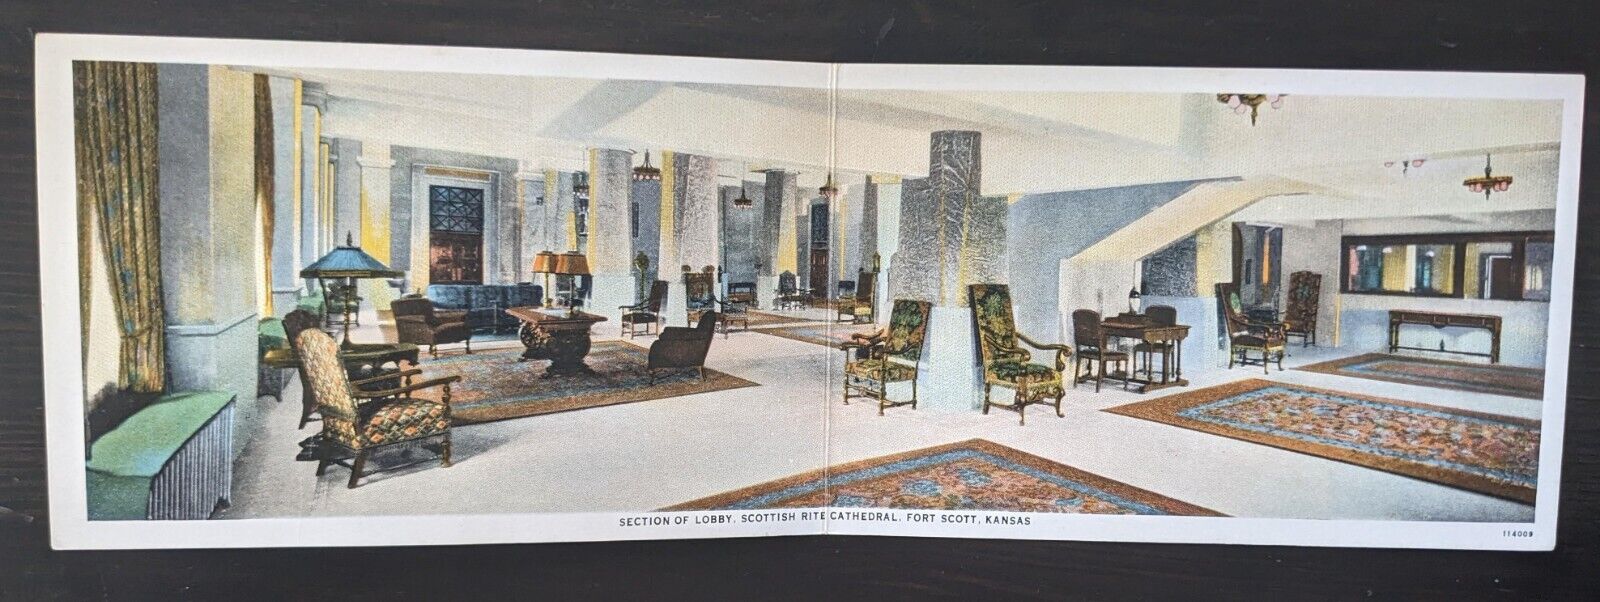 Fort Scott Kansas Vintage Double Postcard View of Scottish Rite Cathedral Lobby